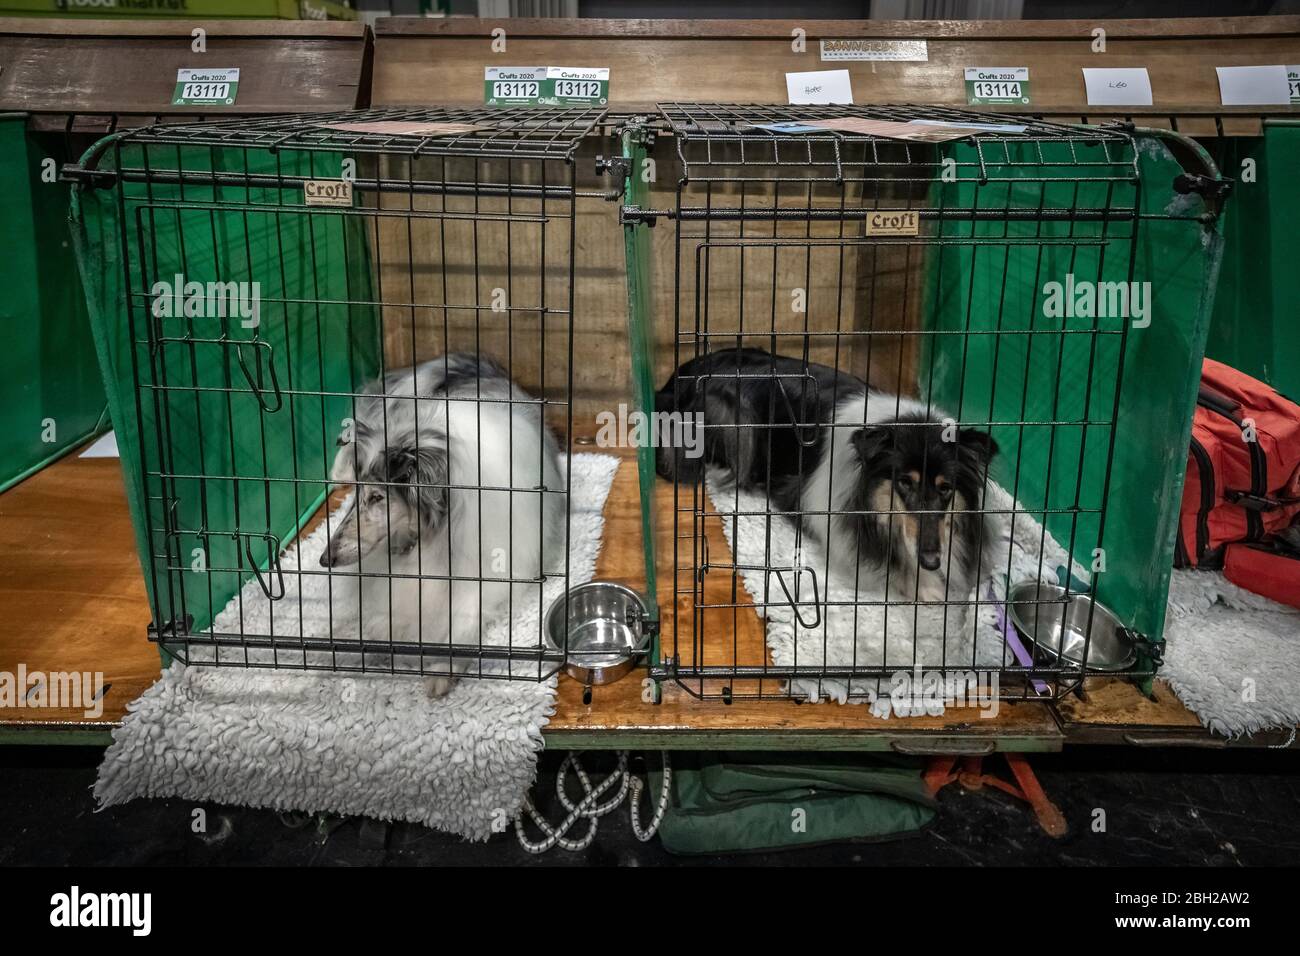 Crufts 2020: Day 3 of the Crufts dog show at the NEC in Birmingham, UK  Stock Photo - Alamy